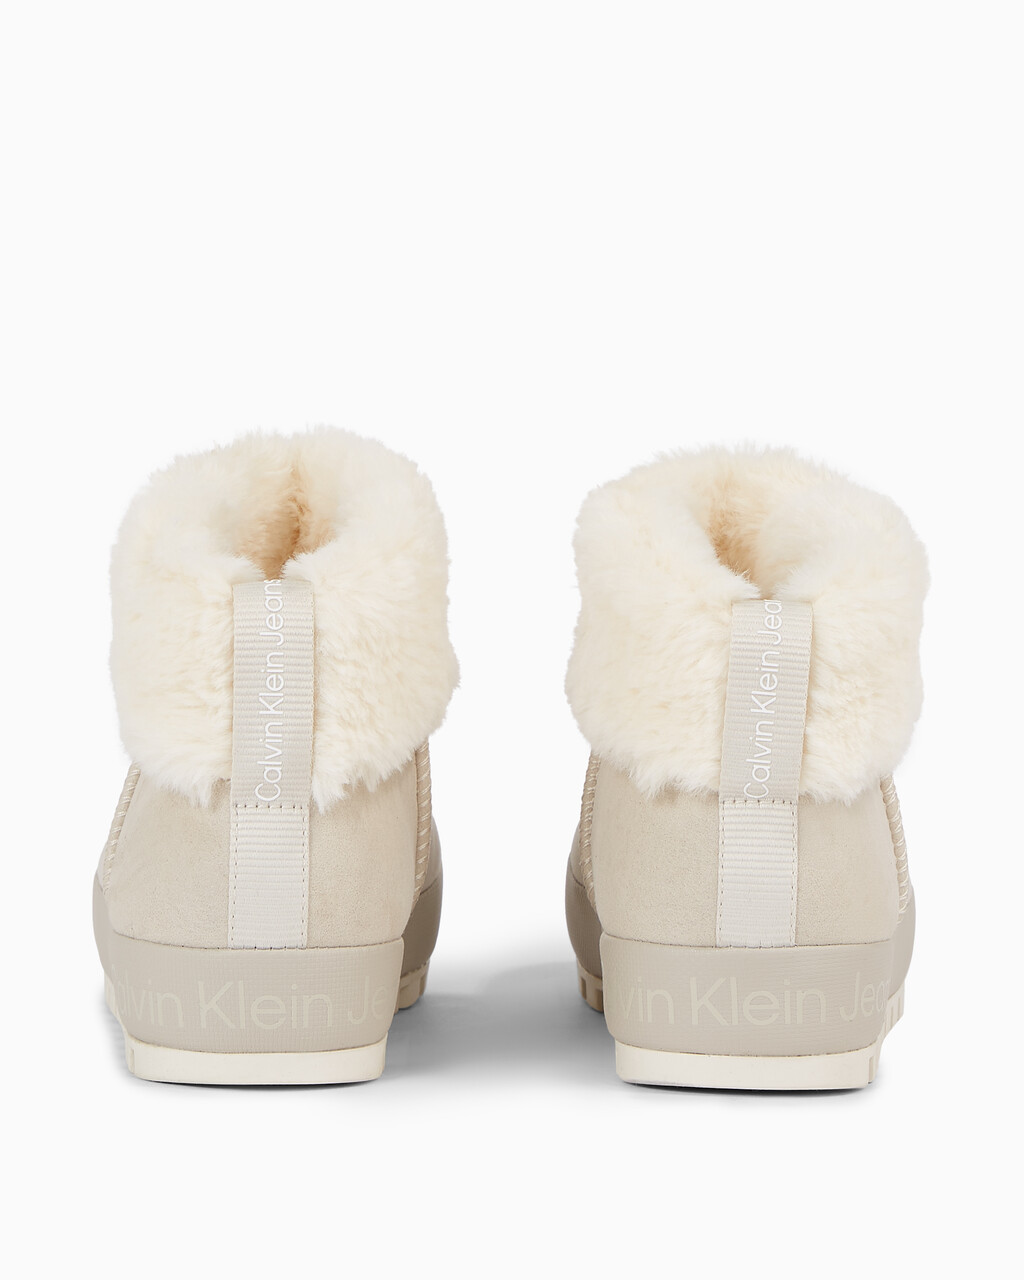 Faux Suede Slippers, Eggshell/Creamy White, hi-res